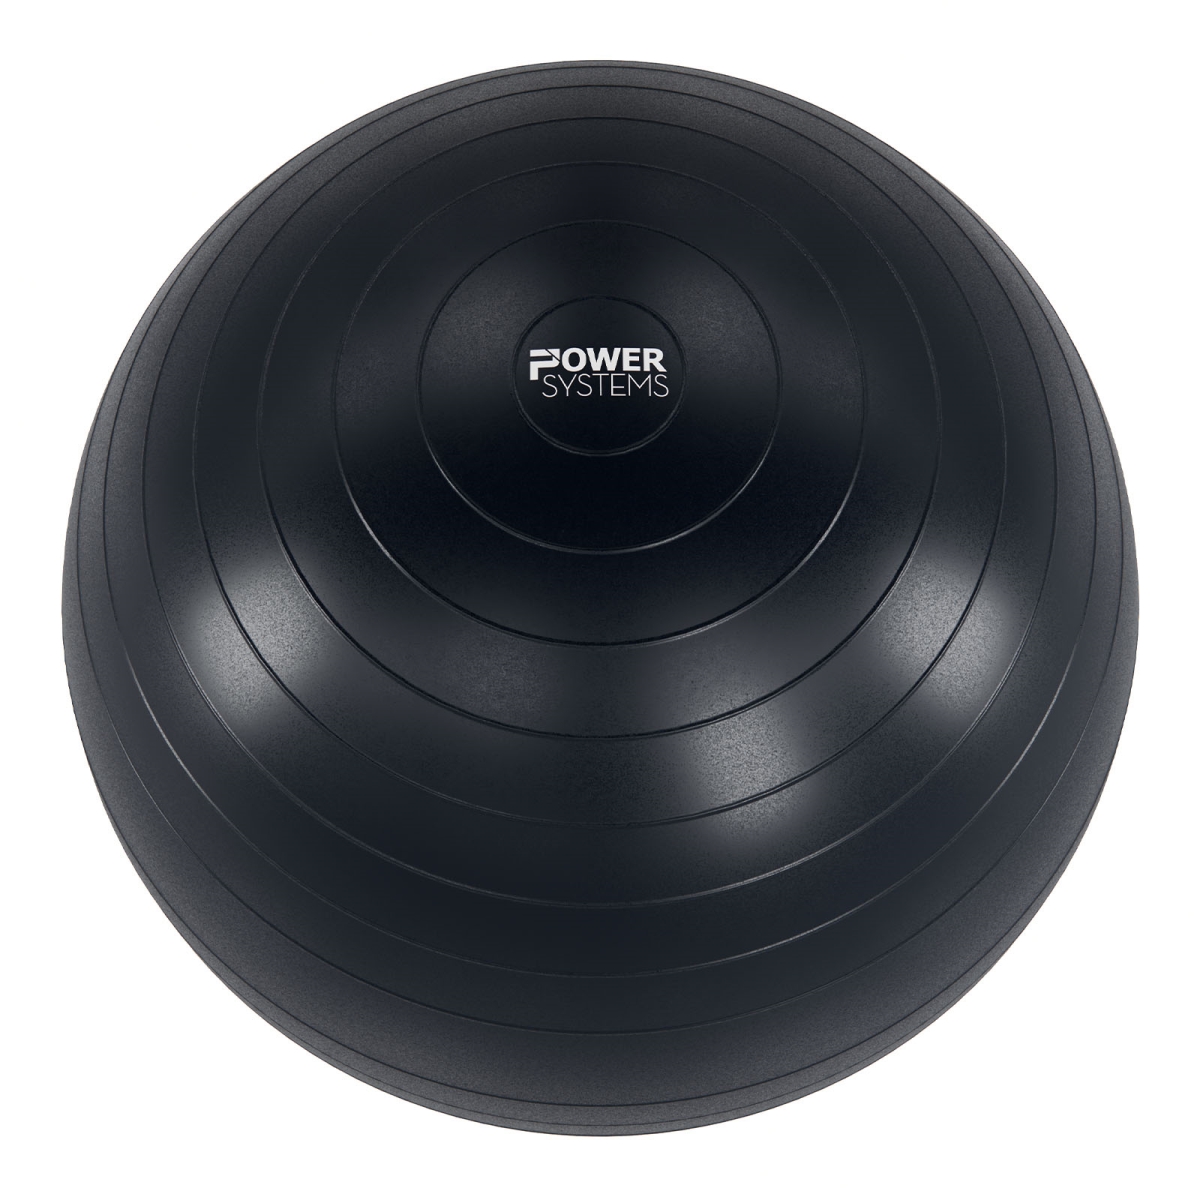 Picture of Power Systems 80751 VersaBall Pro 55cm - Black